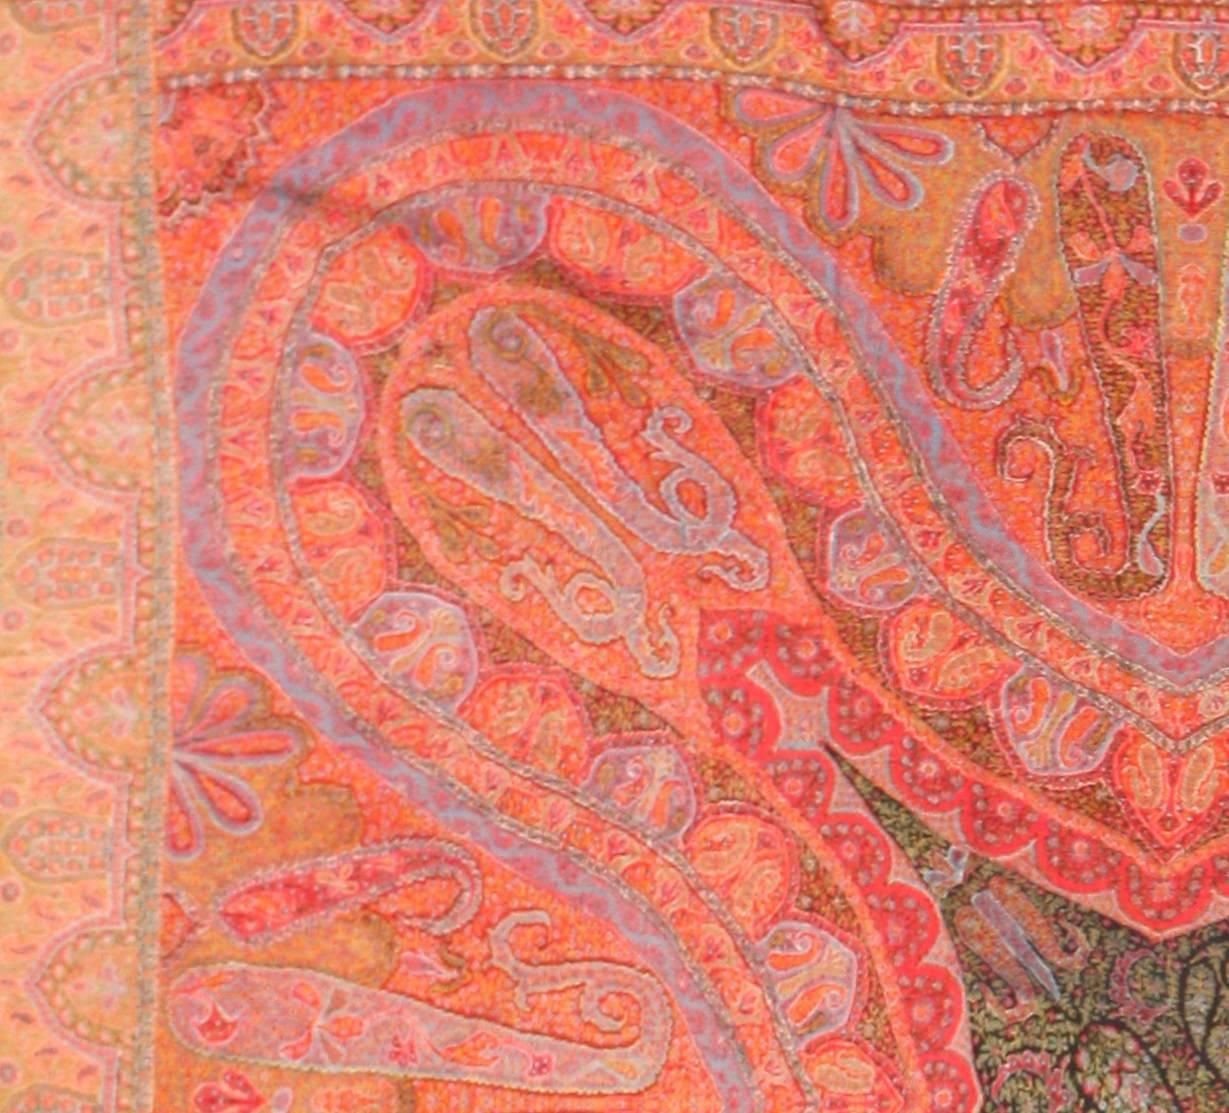 Fine antique Indian floral shawl, country of origin: India, circa date 1860. This antique shawl from India possesses a liquid beauty, with delicate details and a kaleidoscopic pattern that draws the viewer in. Produced in warm tangerine and pale